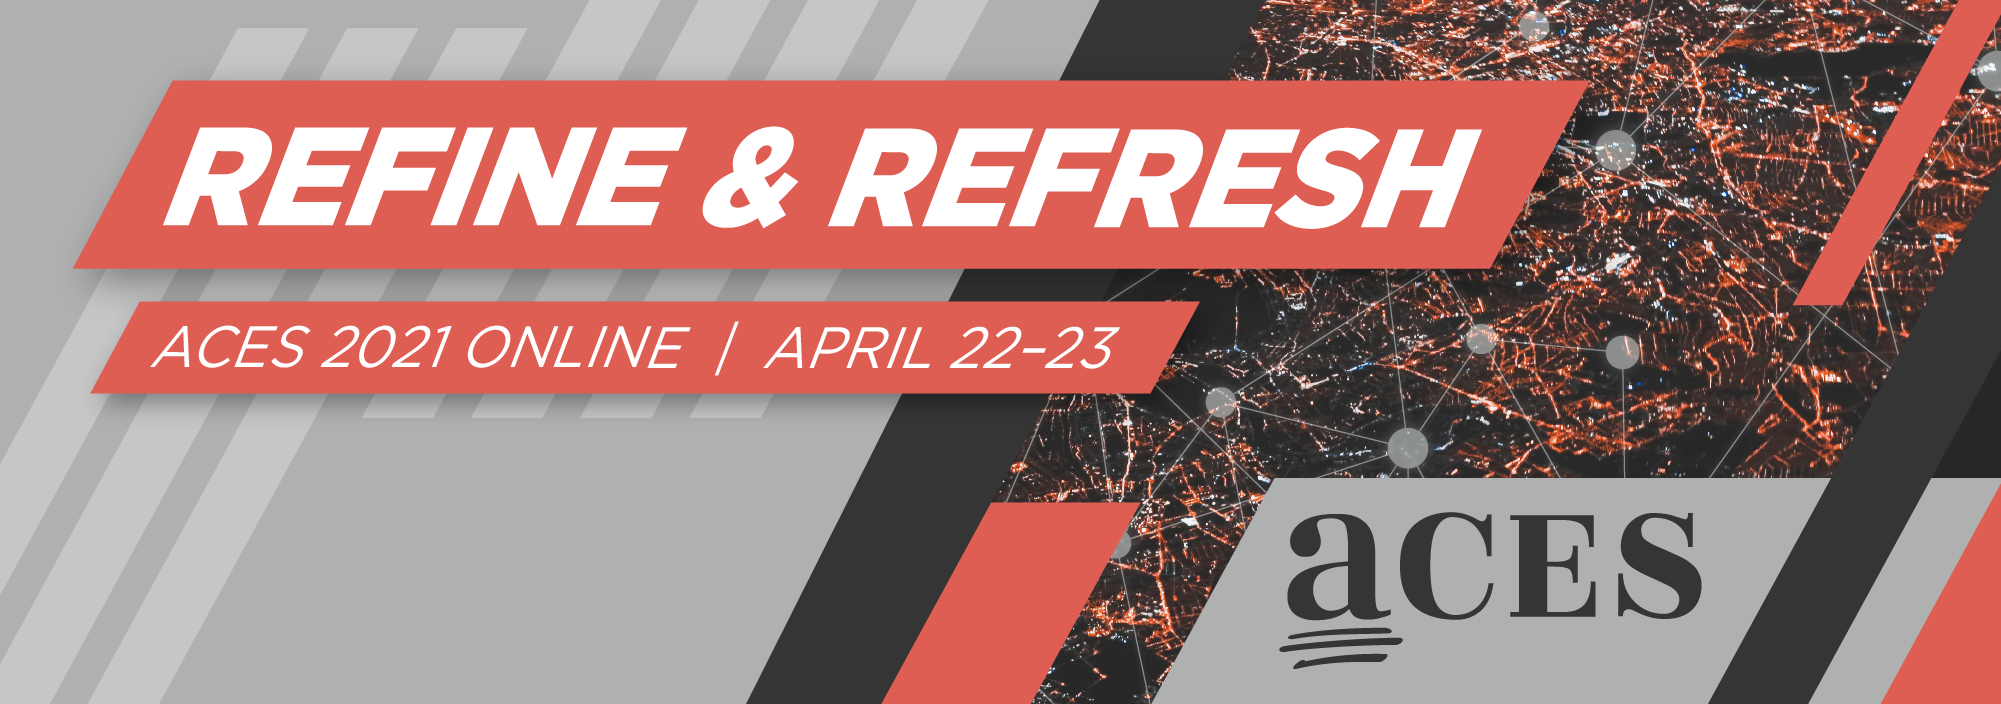 Get Ready to Refine & Refresh with ACES 2021 Online